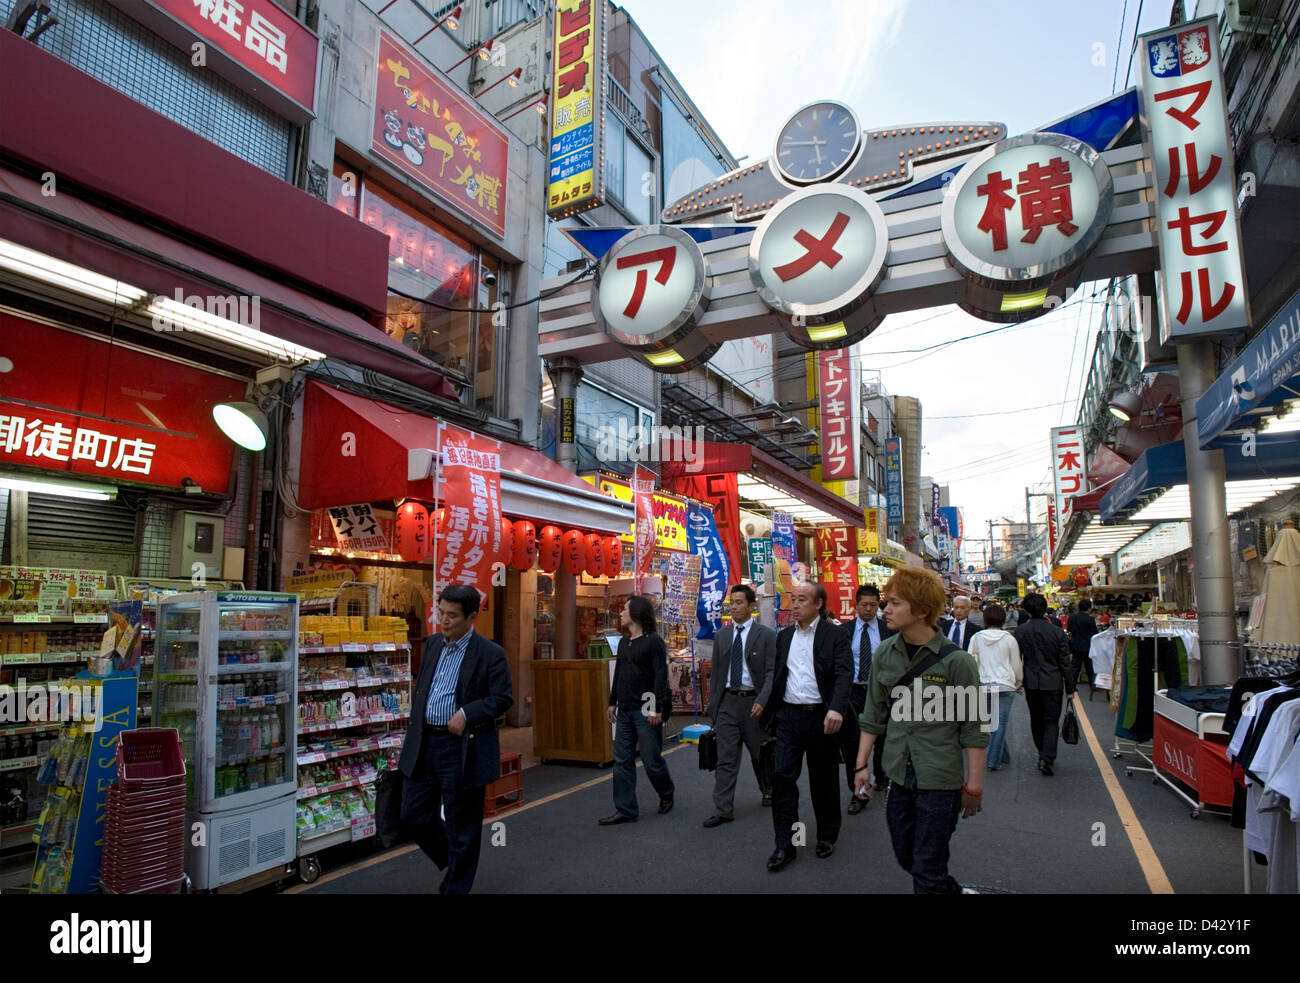 Ameyoko-cho, former black market under railway in Okachimachi Tokyo, is a thriving food and merchandise marketplace for bargains Stock Photo